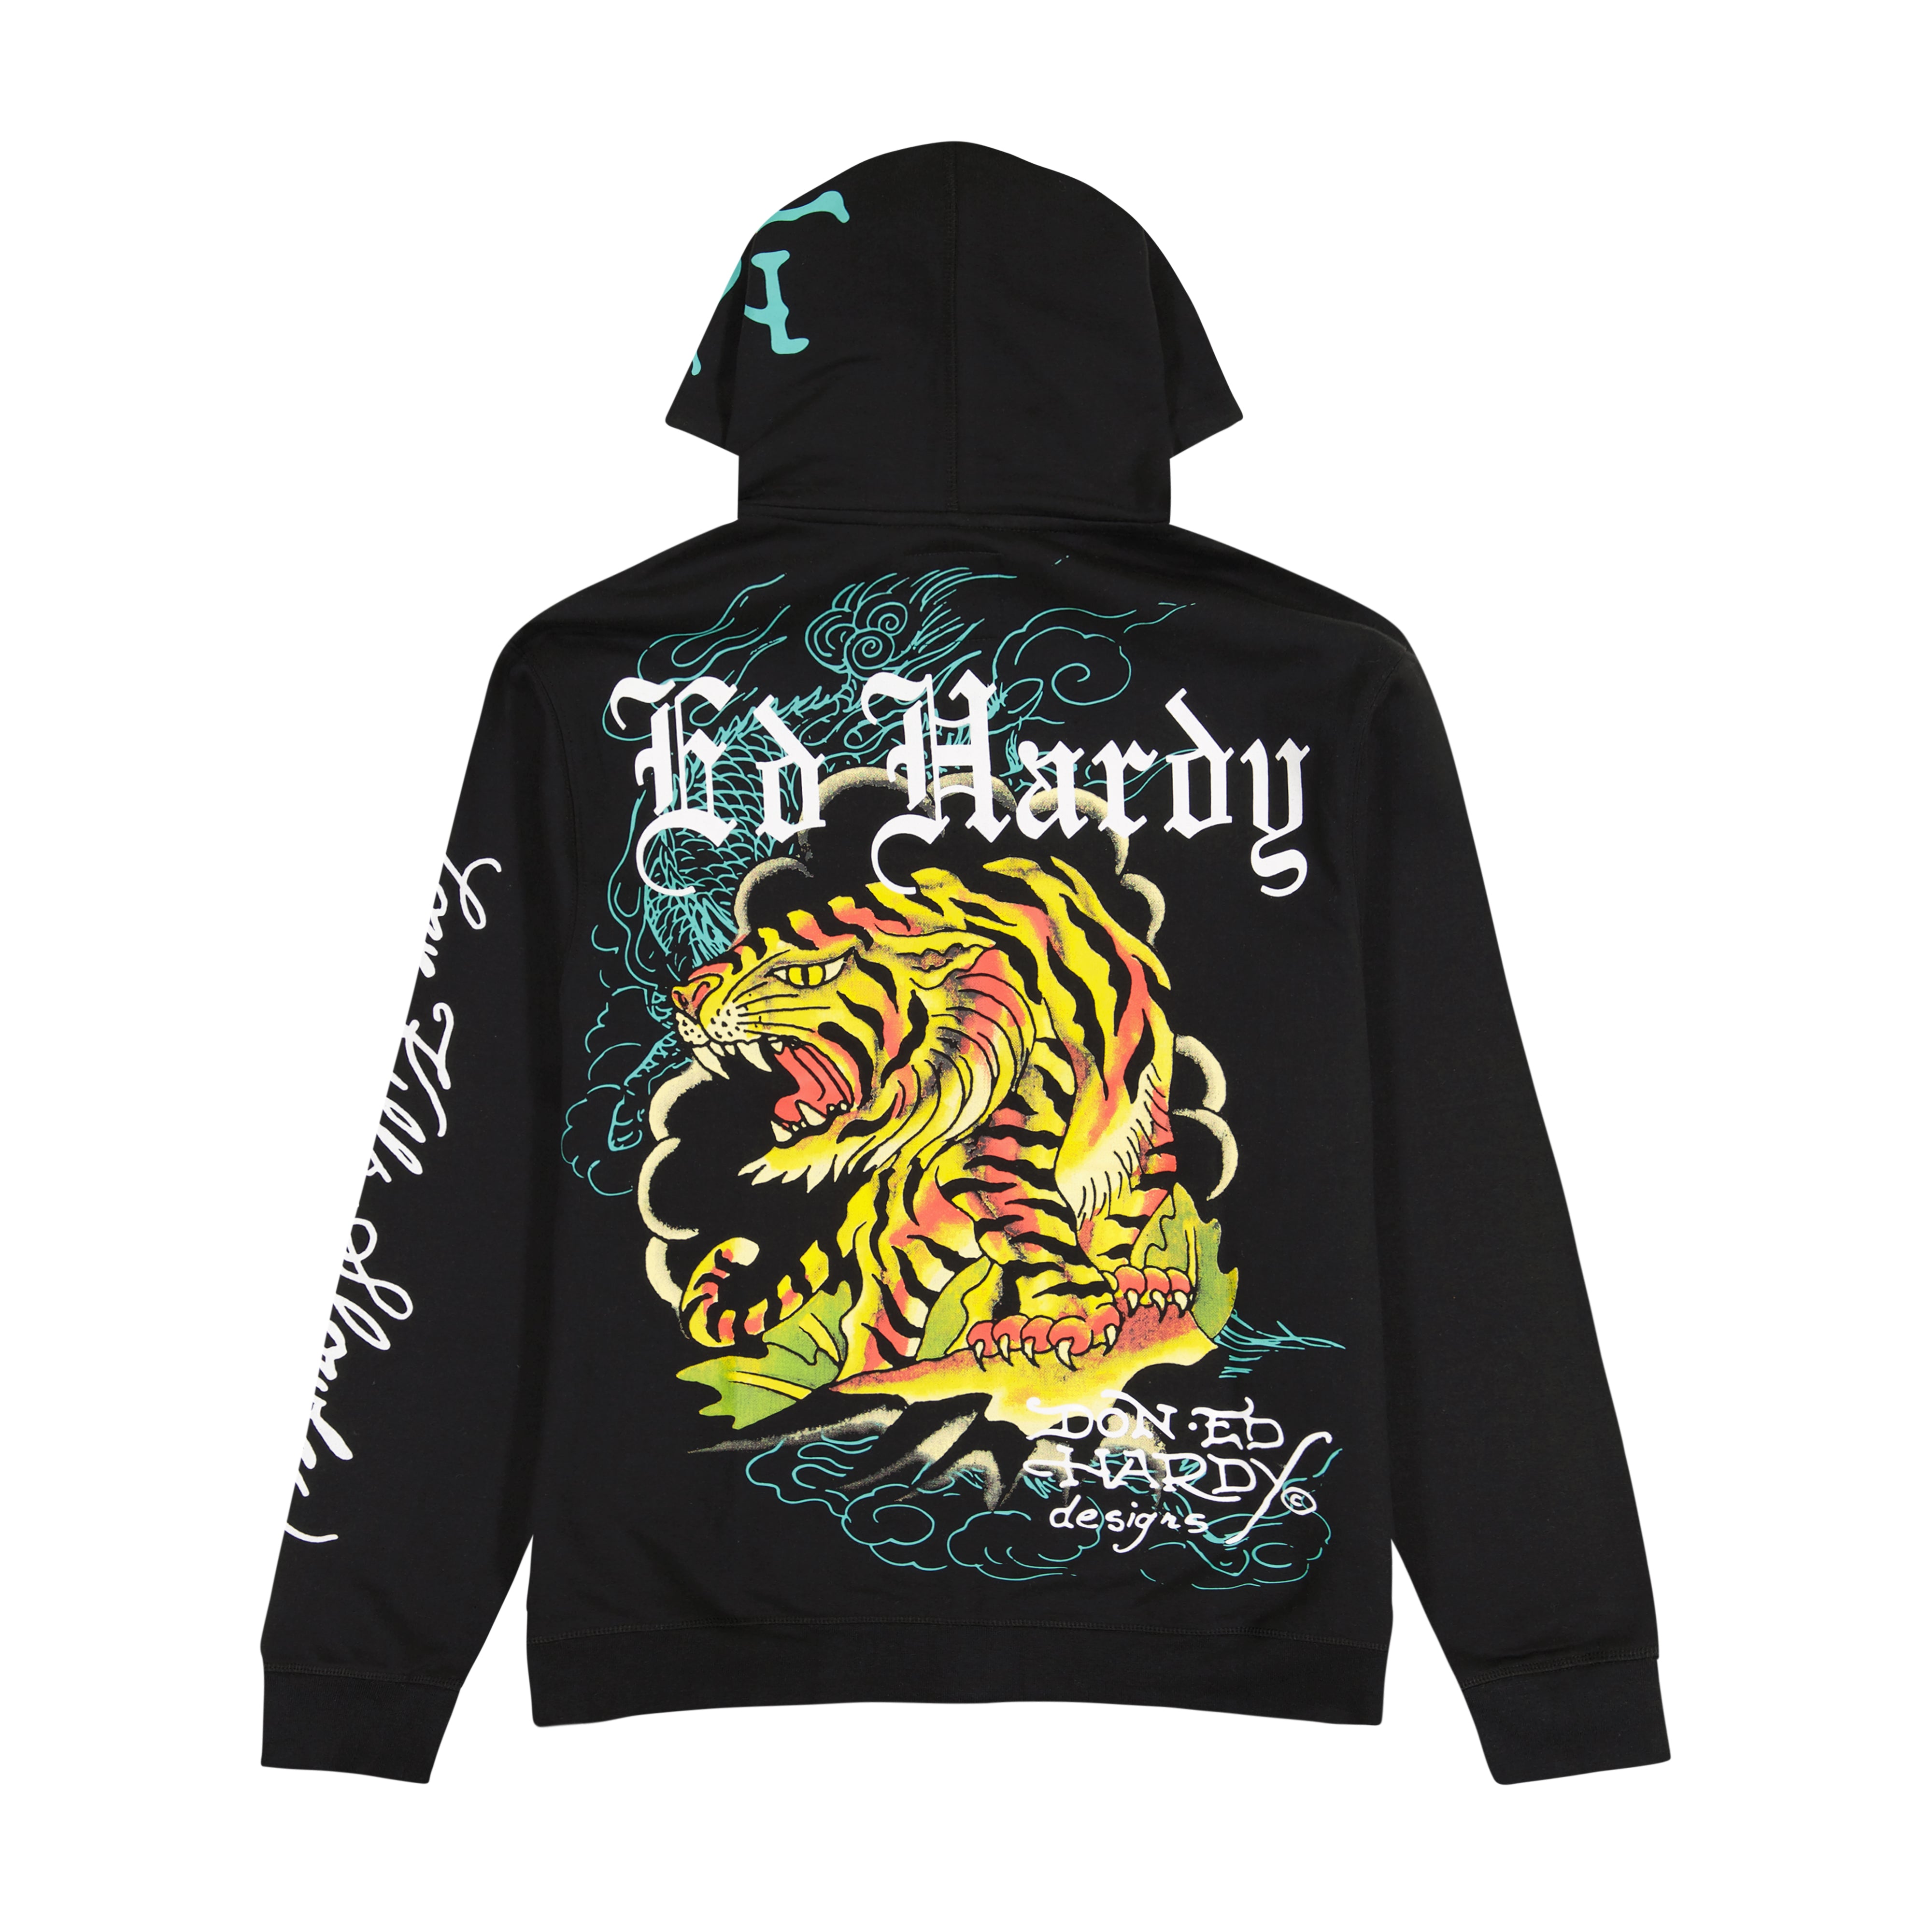 Ed Hardy  The official website of the Ed Hardy brand.